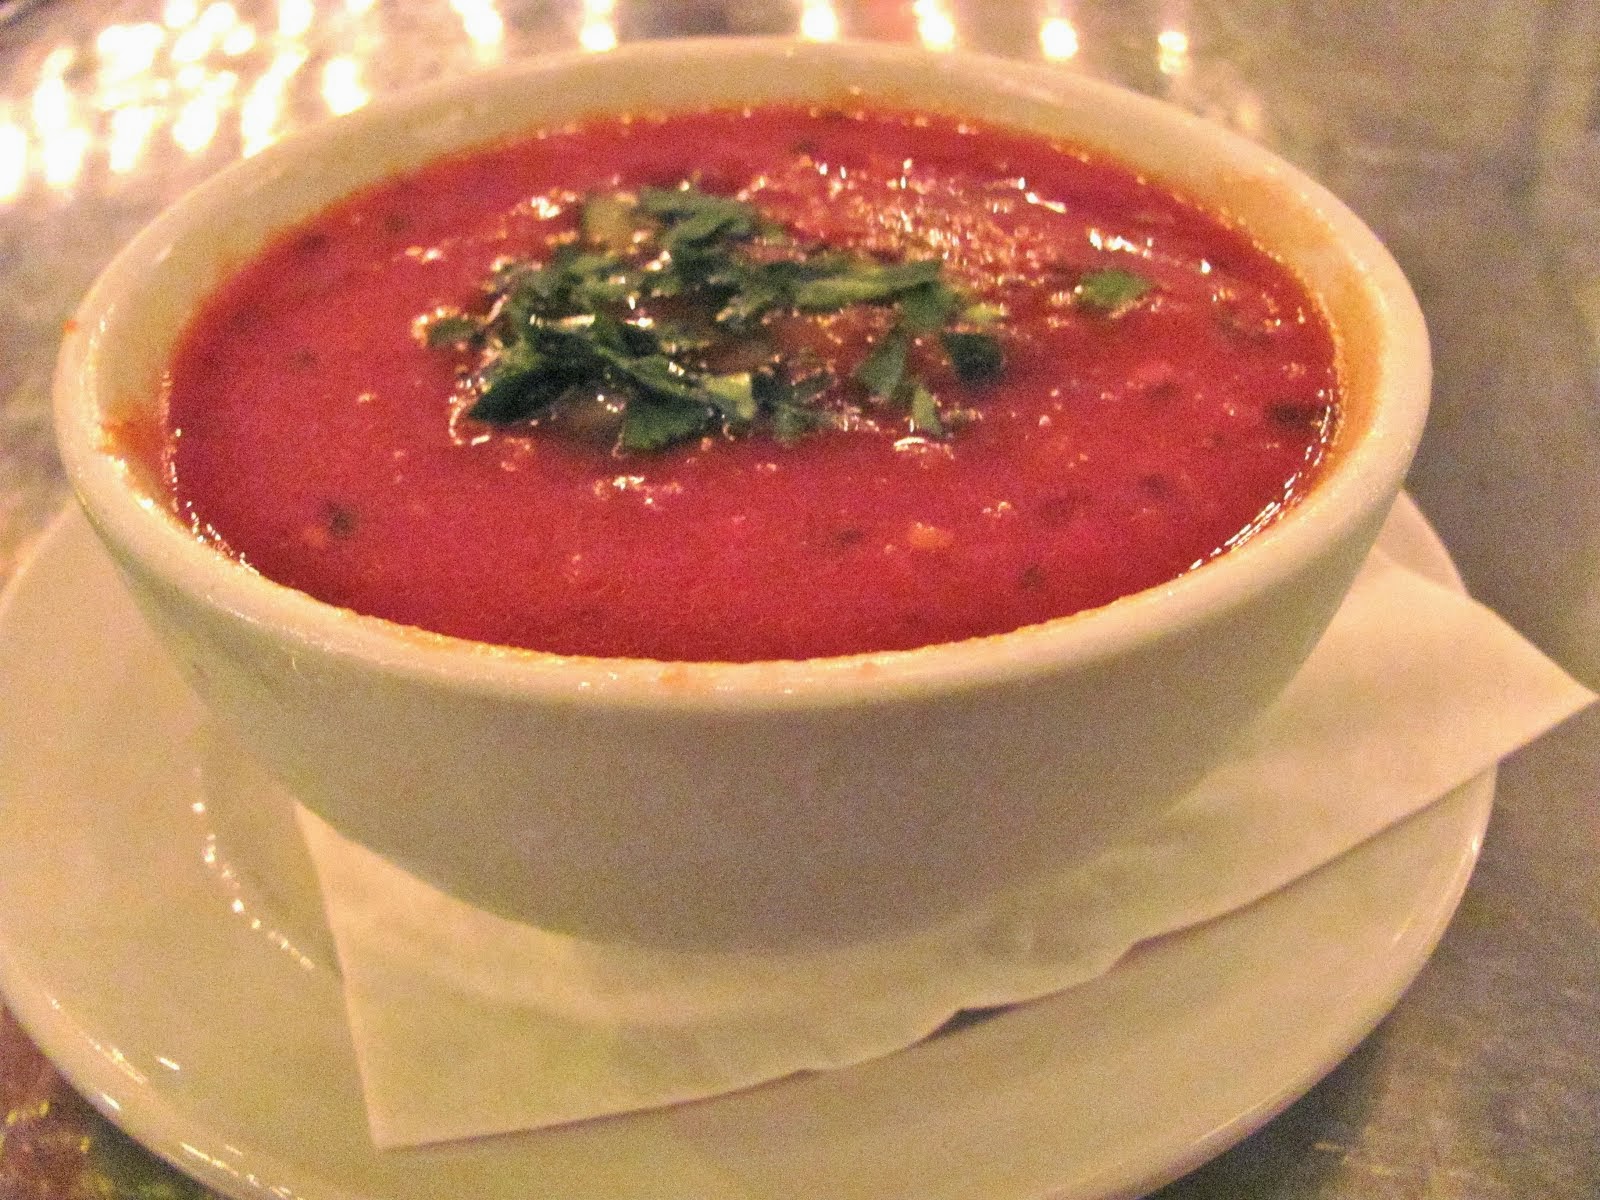 Tomato or broth-based soups are a great winter choice!